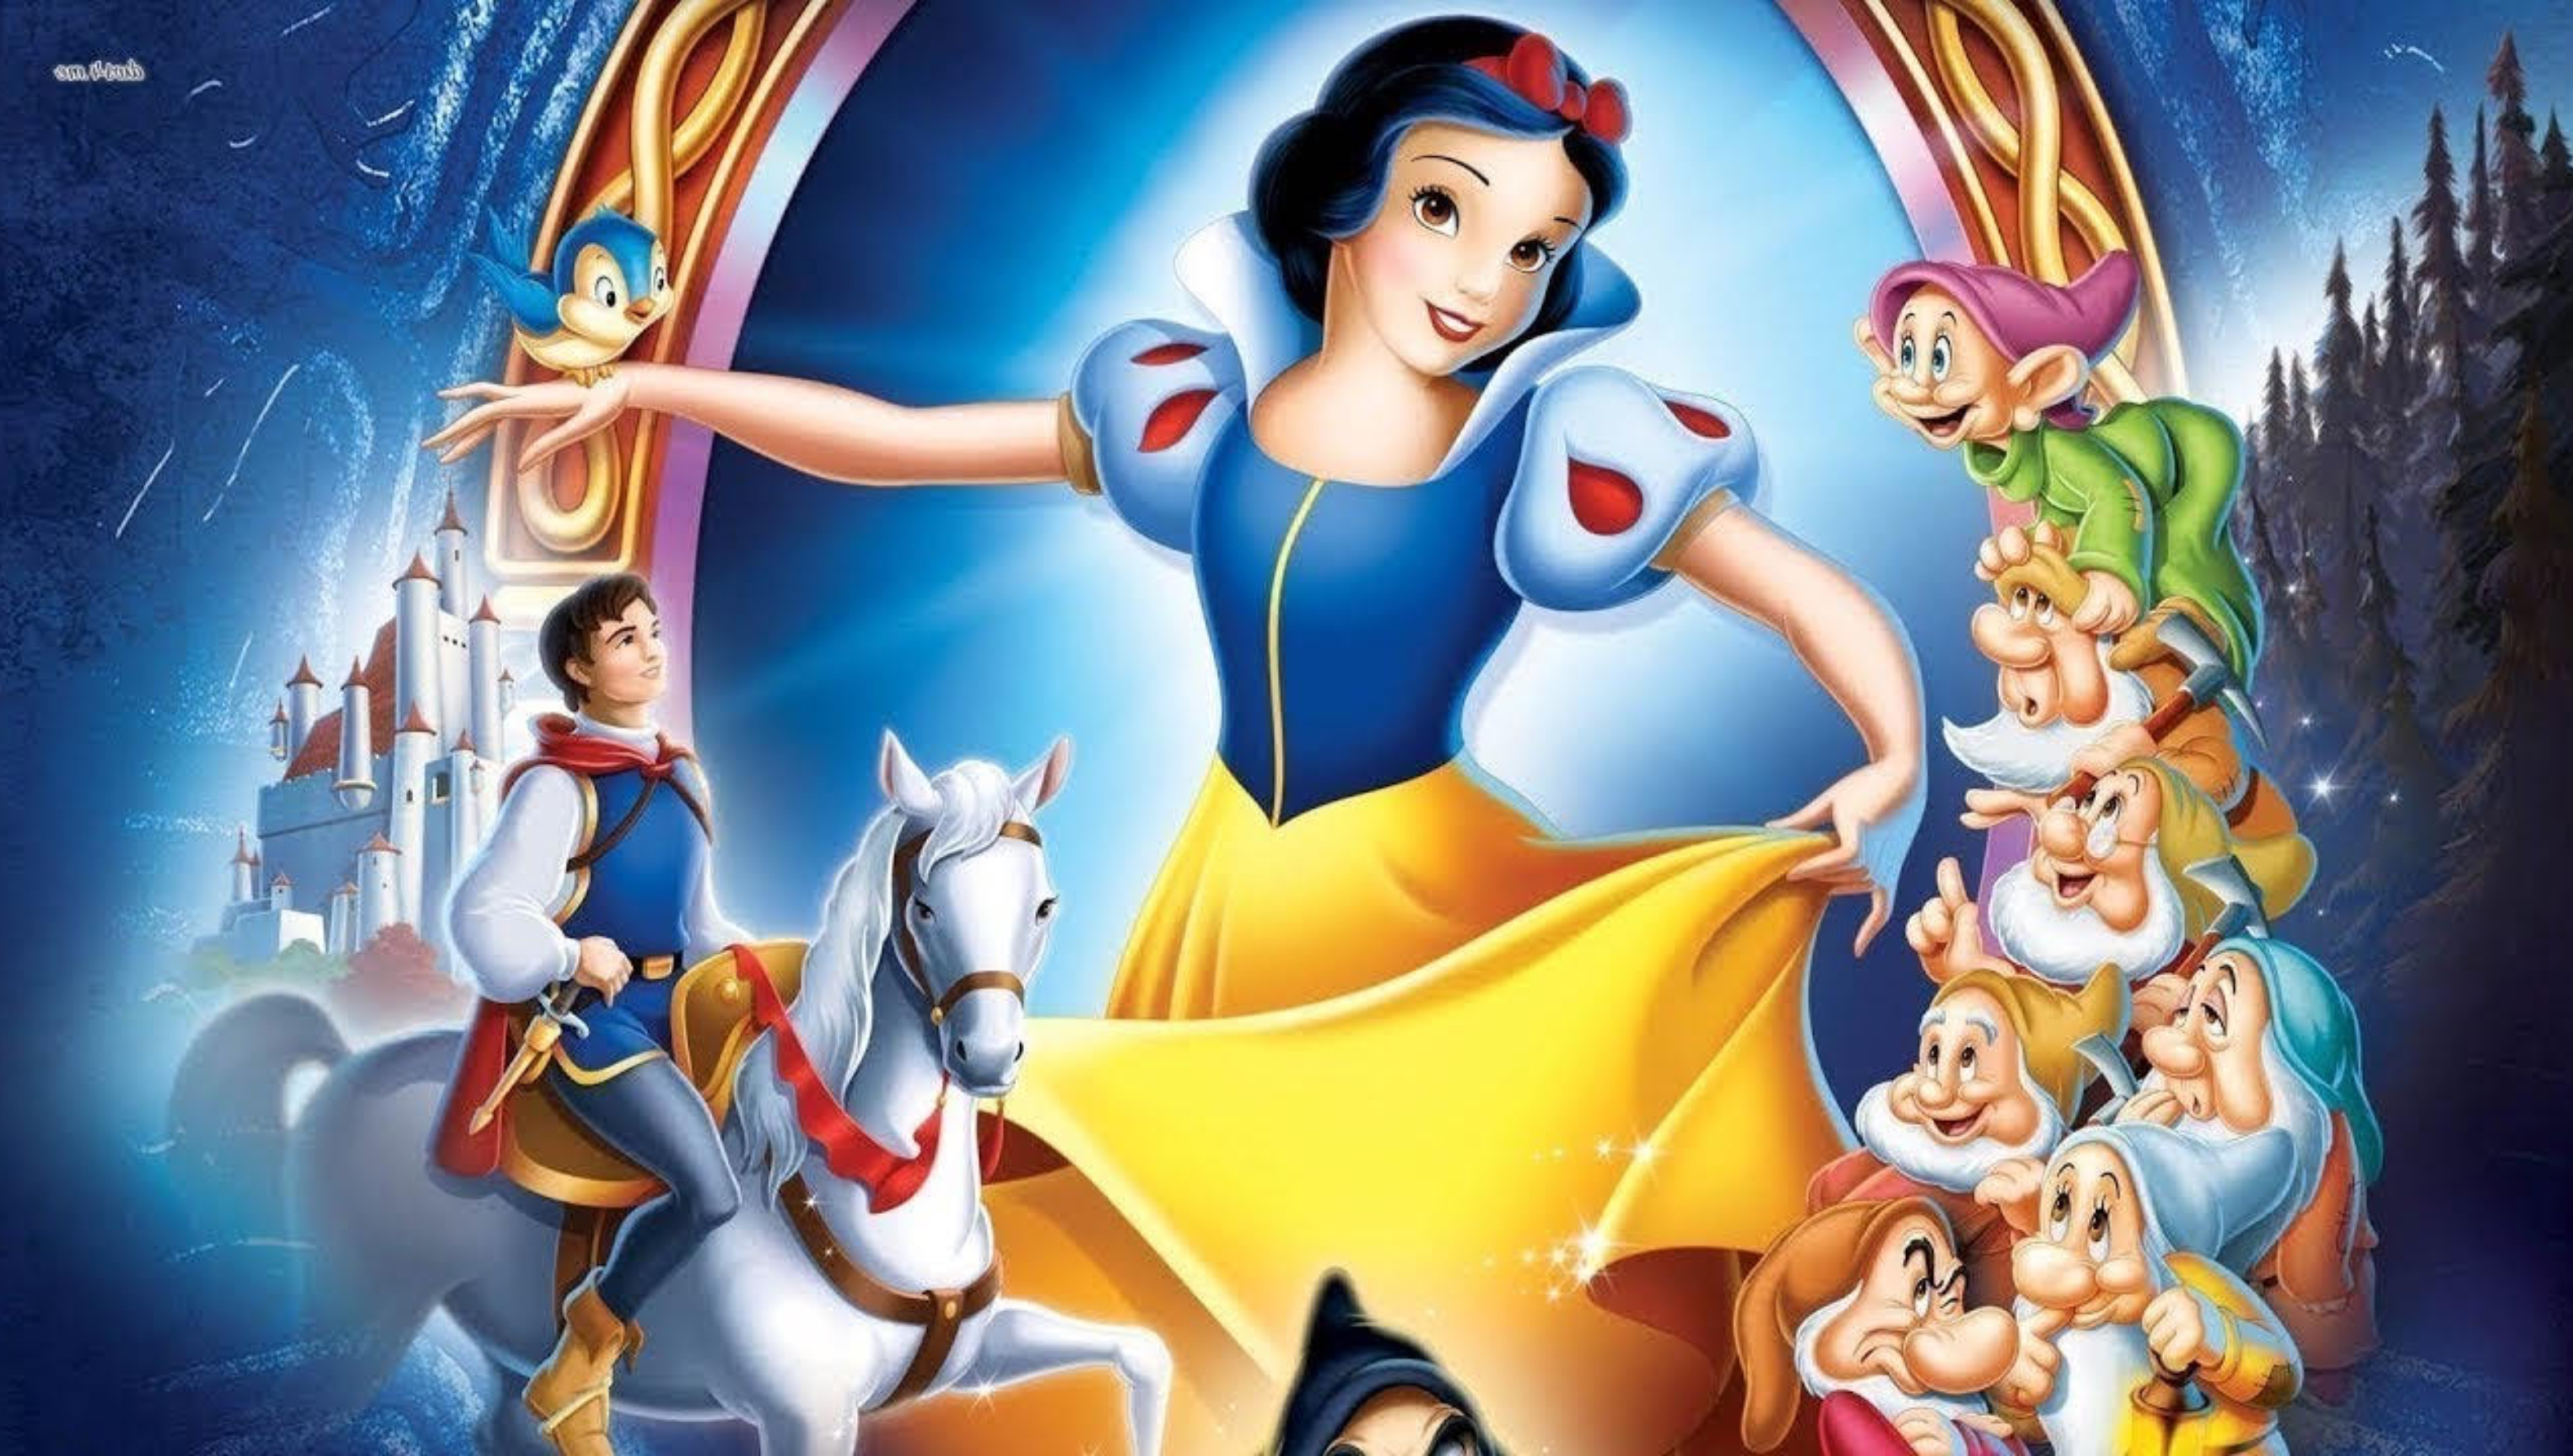 Live-Action ‘Snow White and the Seven Dwarfs’ Set to Begin Production in Early 2020